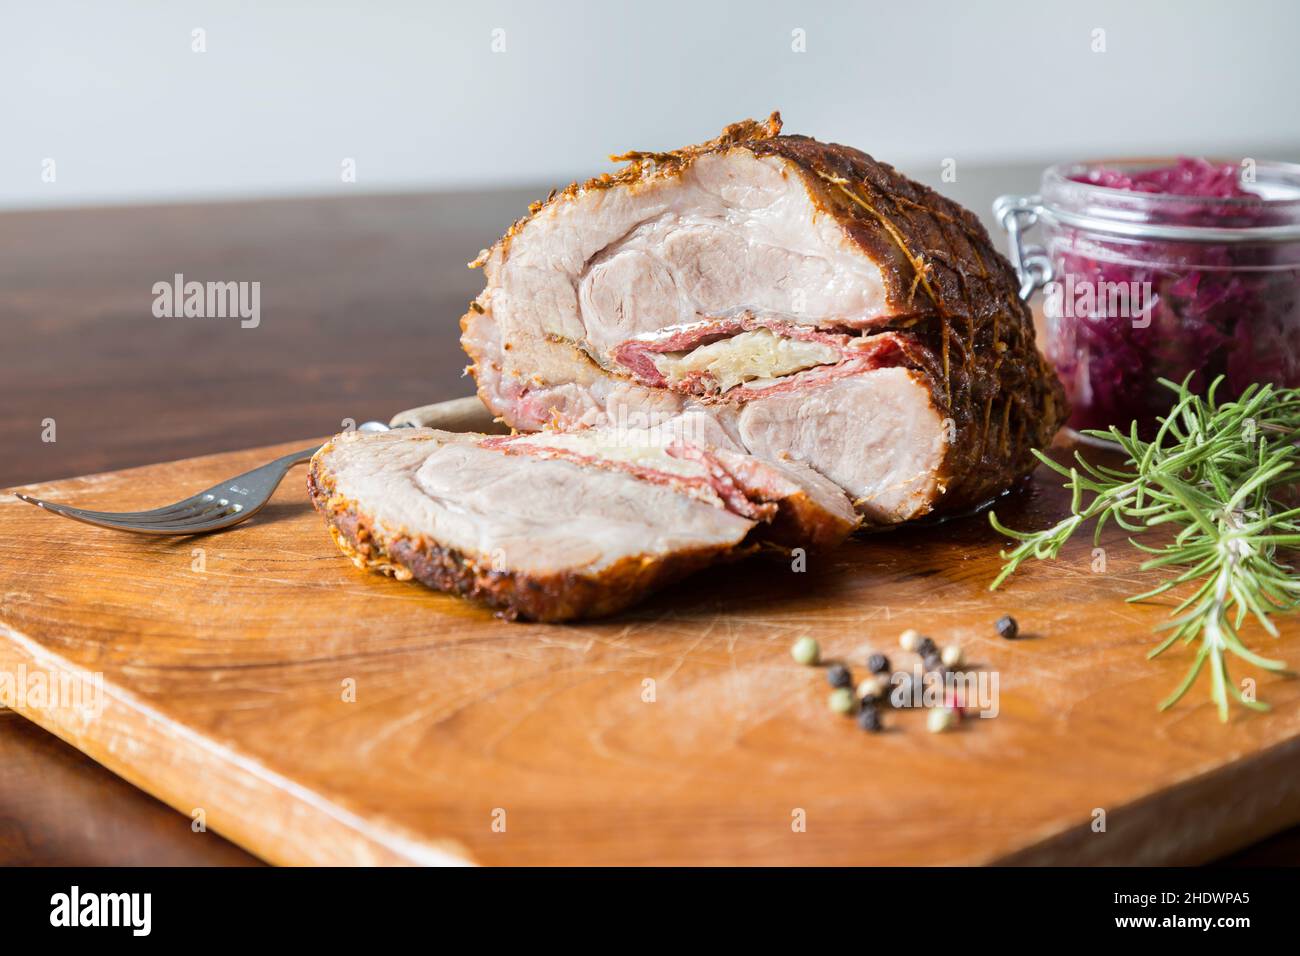 roast pork, red cabbage, traditional cuisine, roast porks, red cabbages Stock Photo